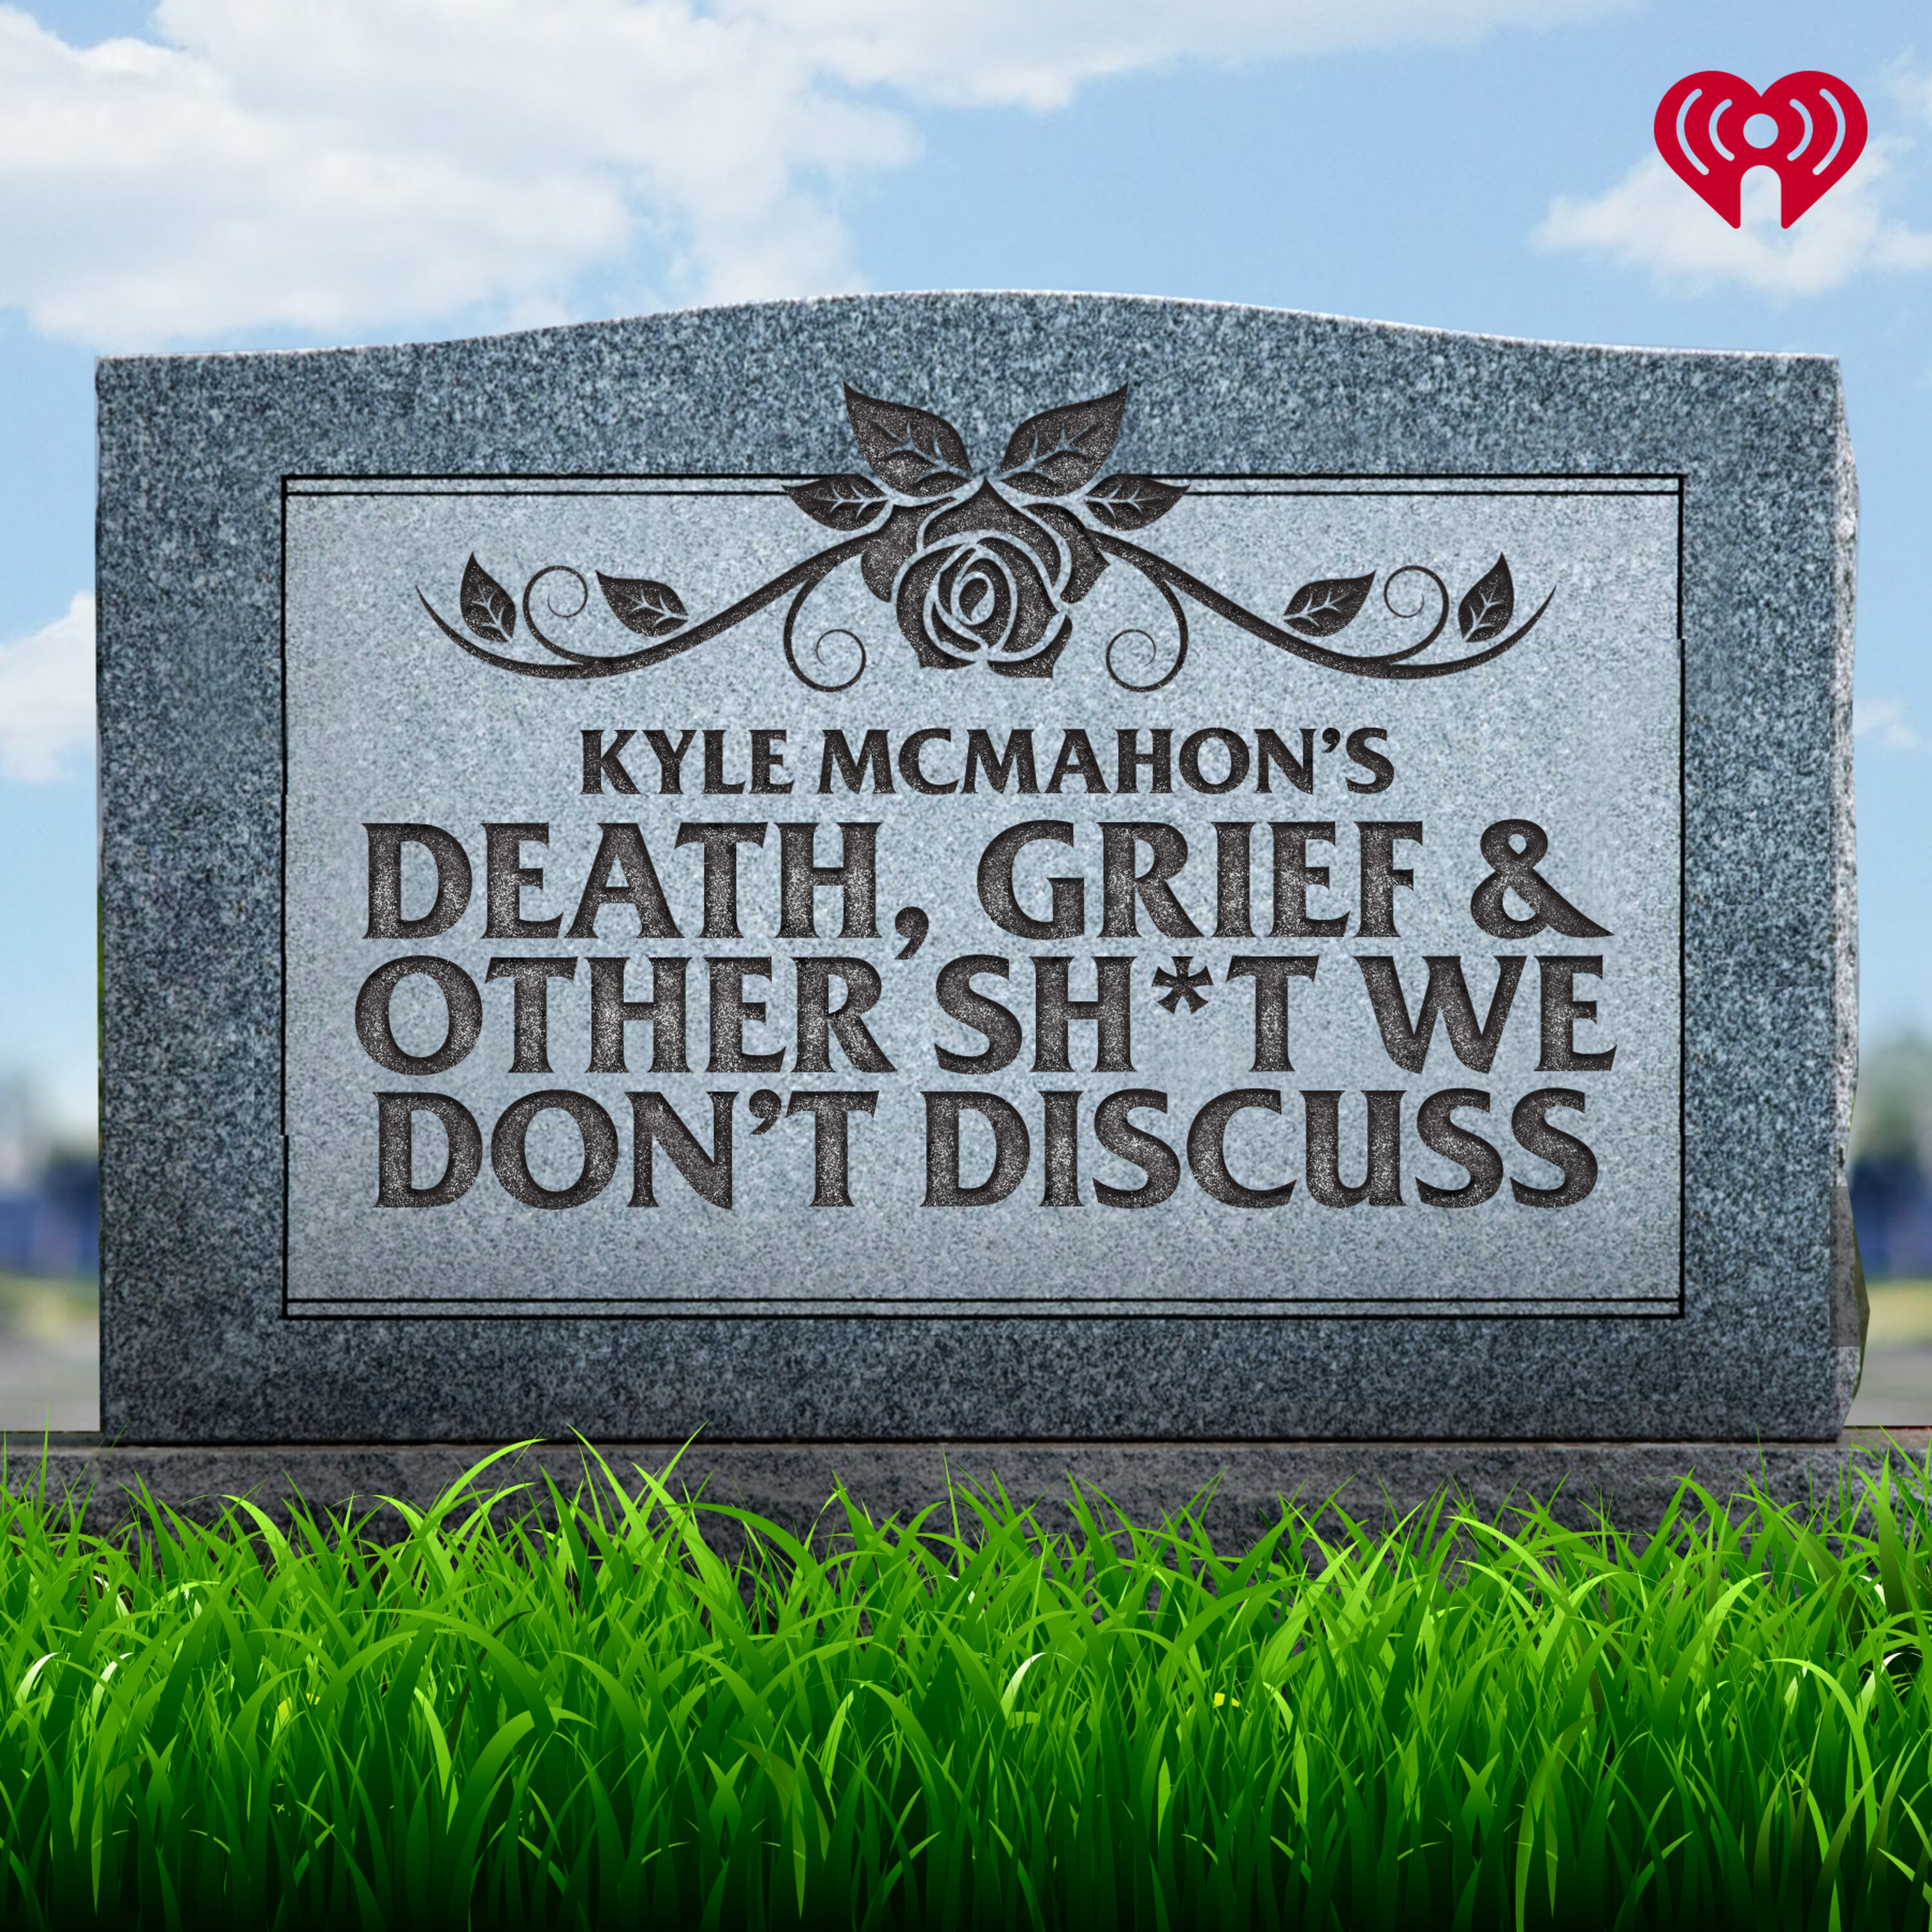 Introducing Death, Grief, & Other Sh*t We Don't Discuss Image